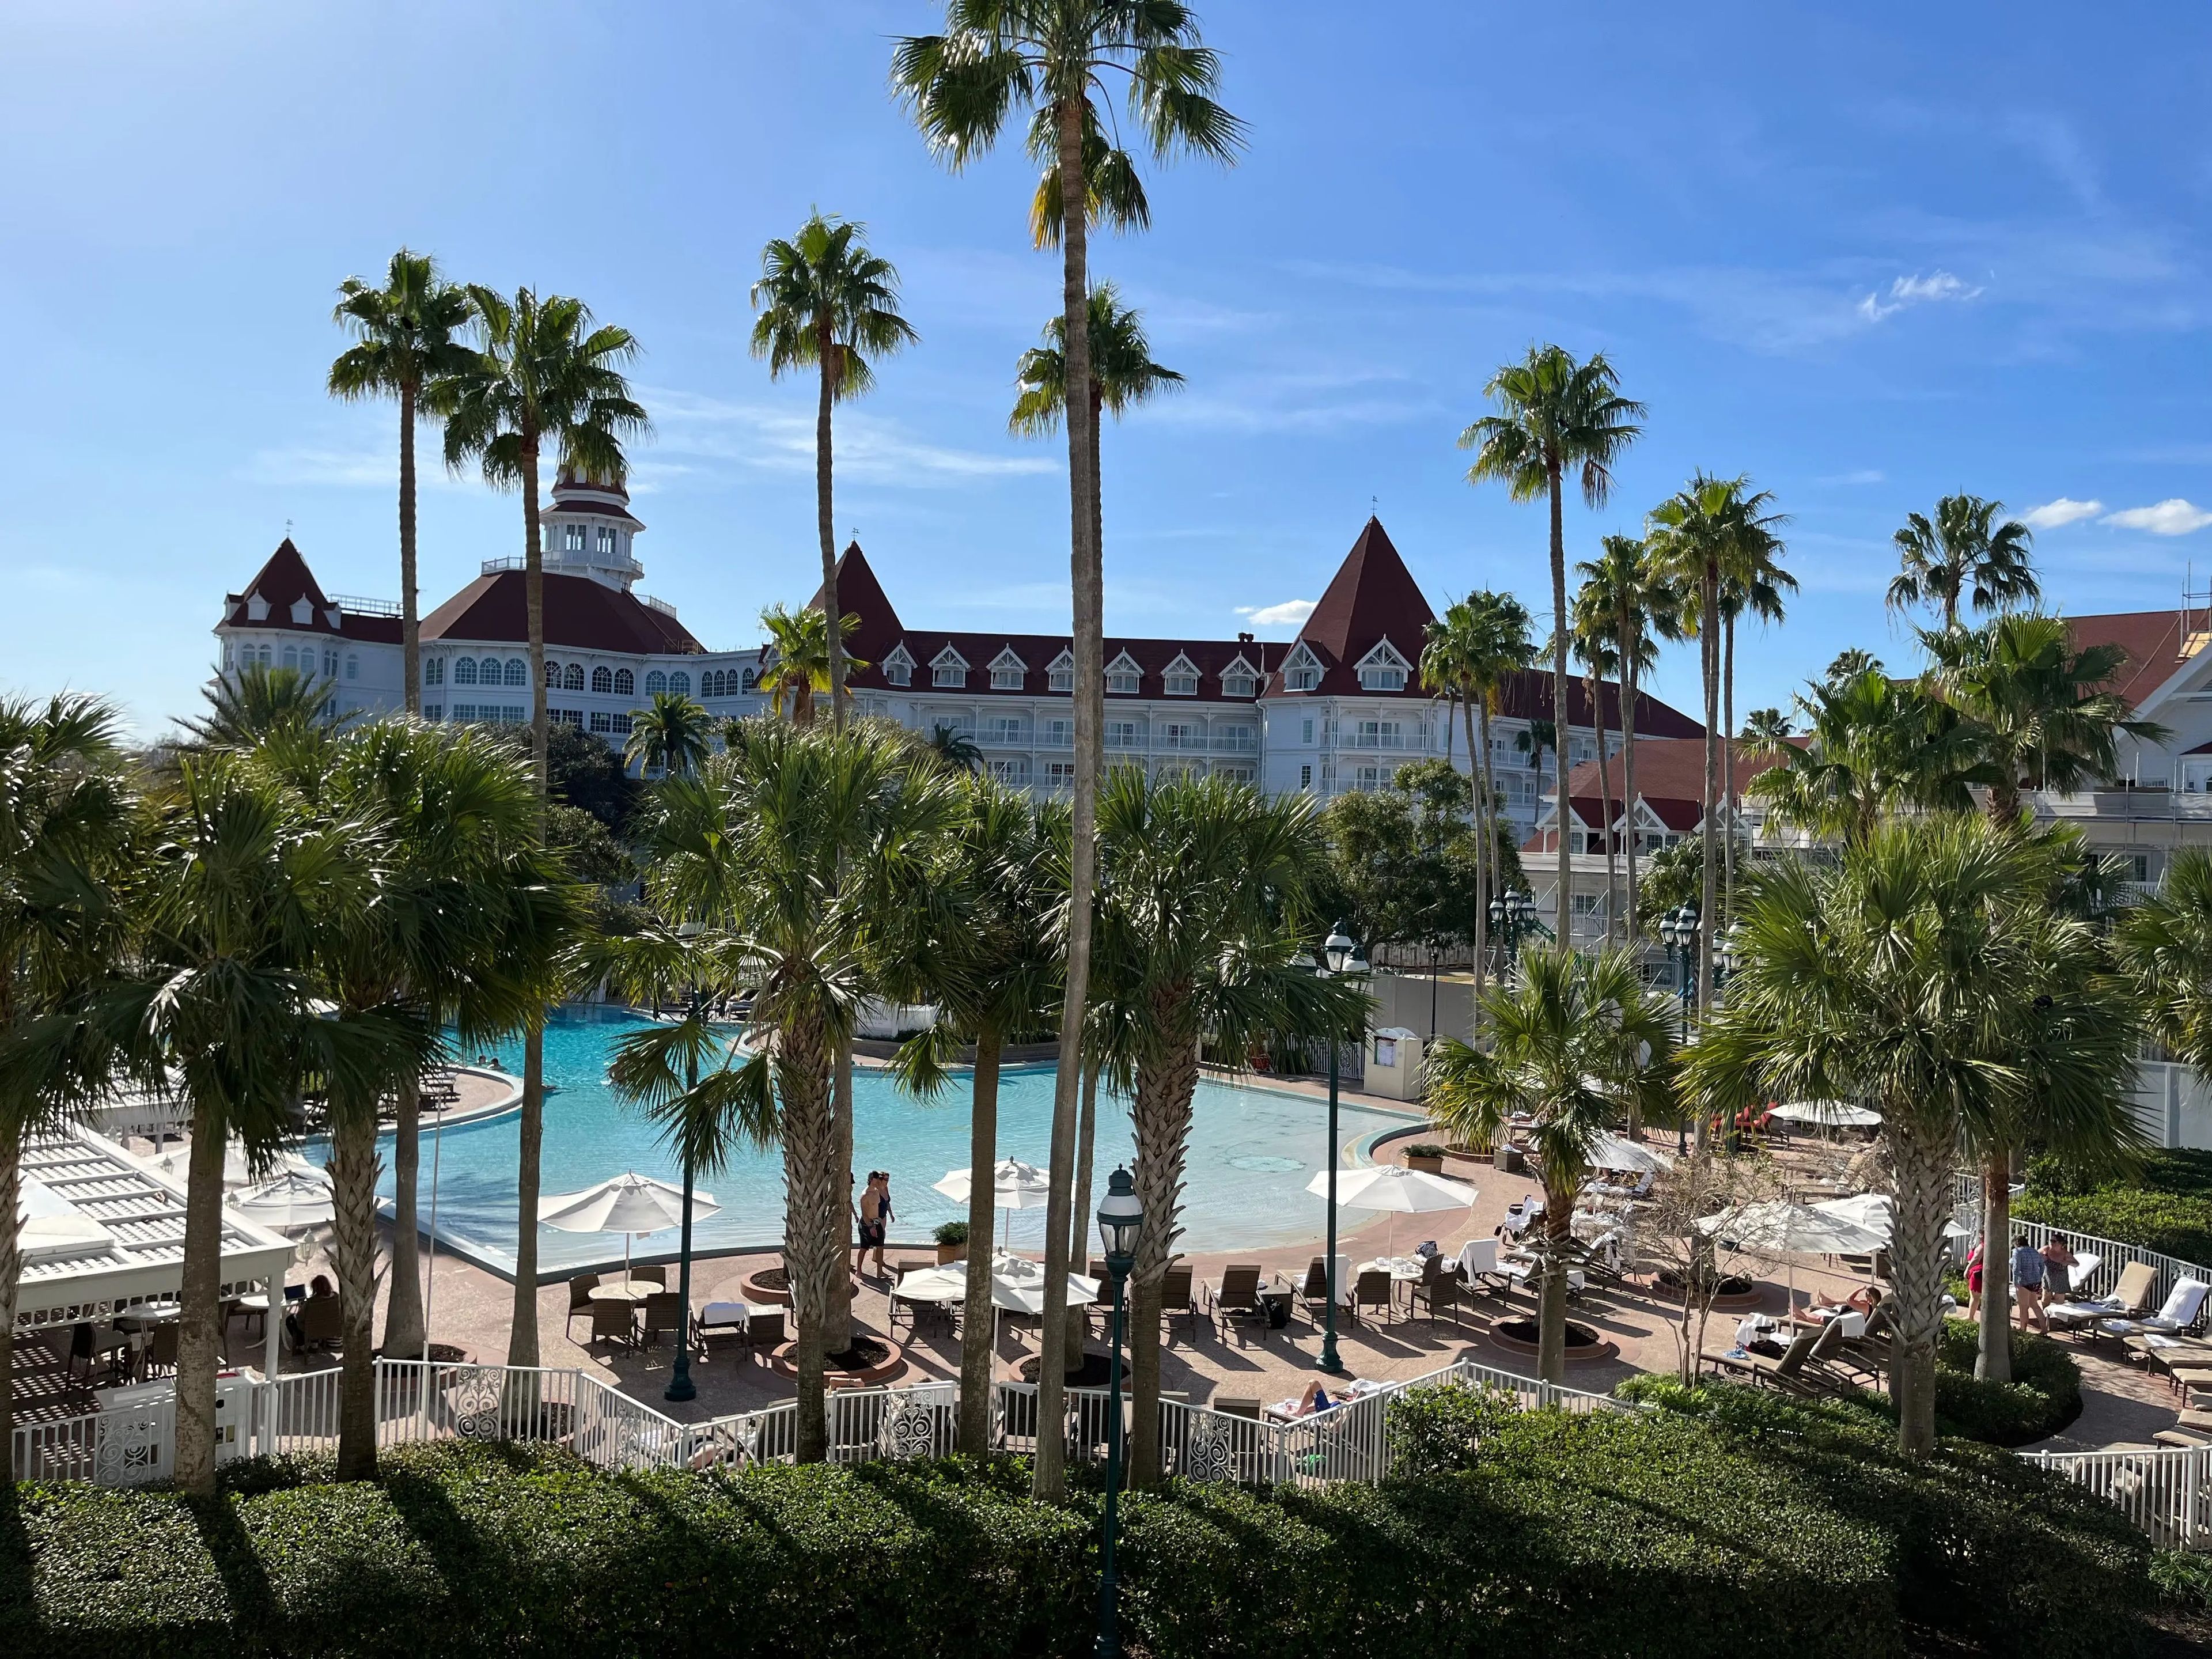 view of the grand floridian resort and pool from the patio of jenna's hotel room